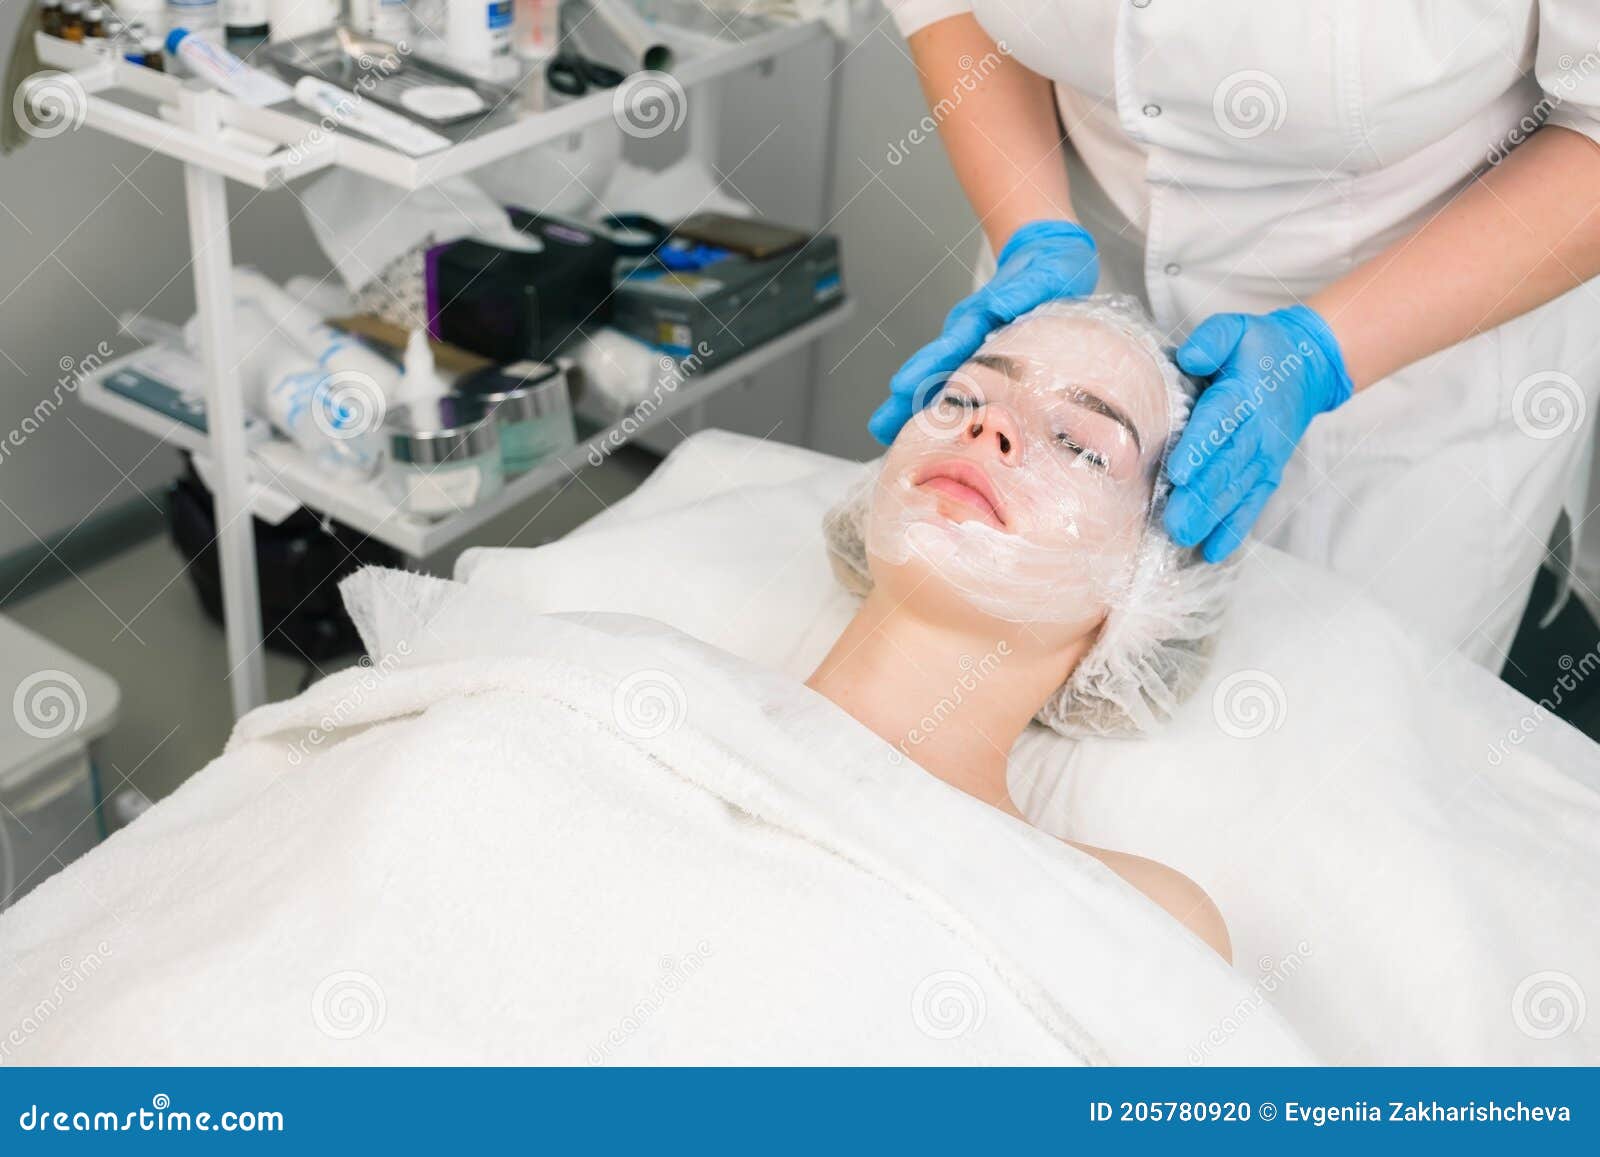 Cosmetologist Doctor Applies Film on Cream with Anesthesia on Woman`s Face. - of patient, beautician: 205780920